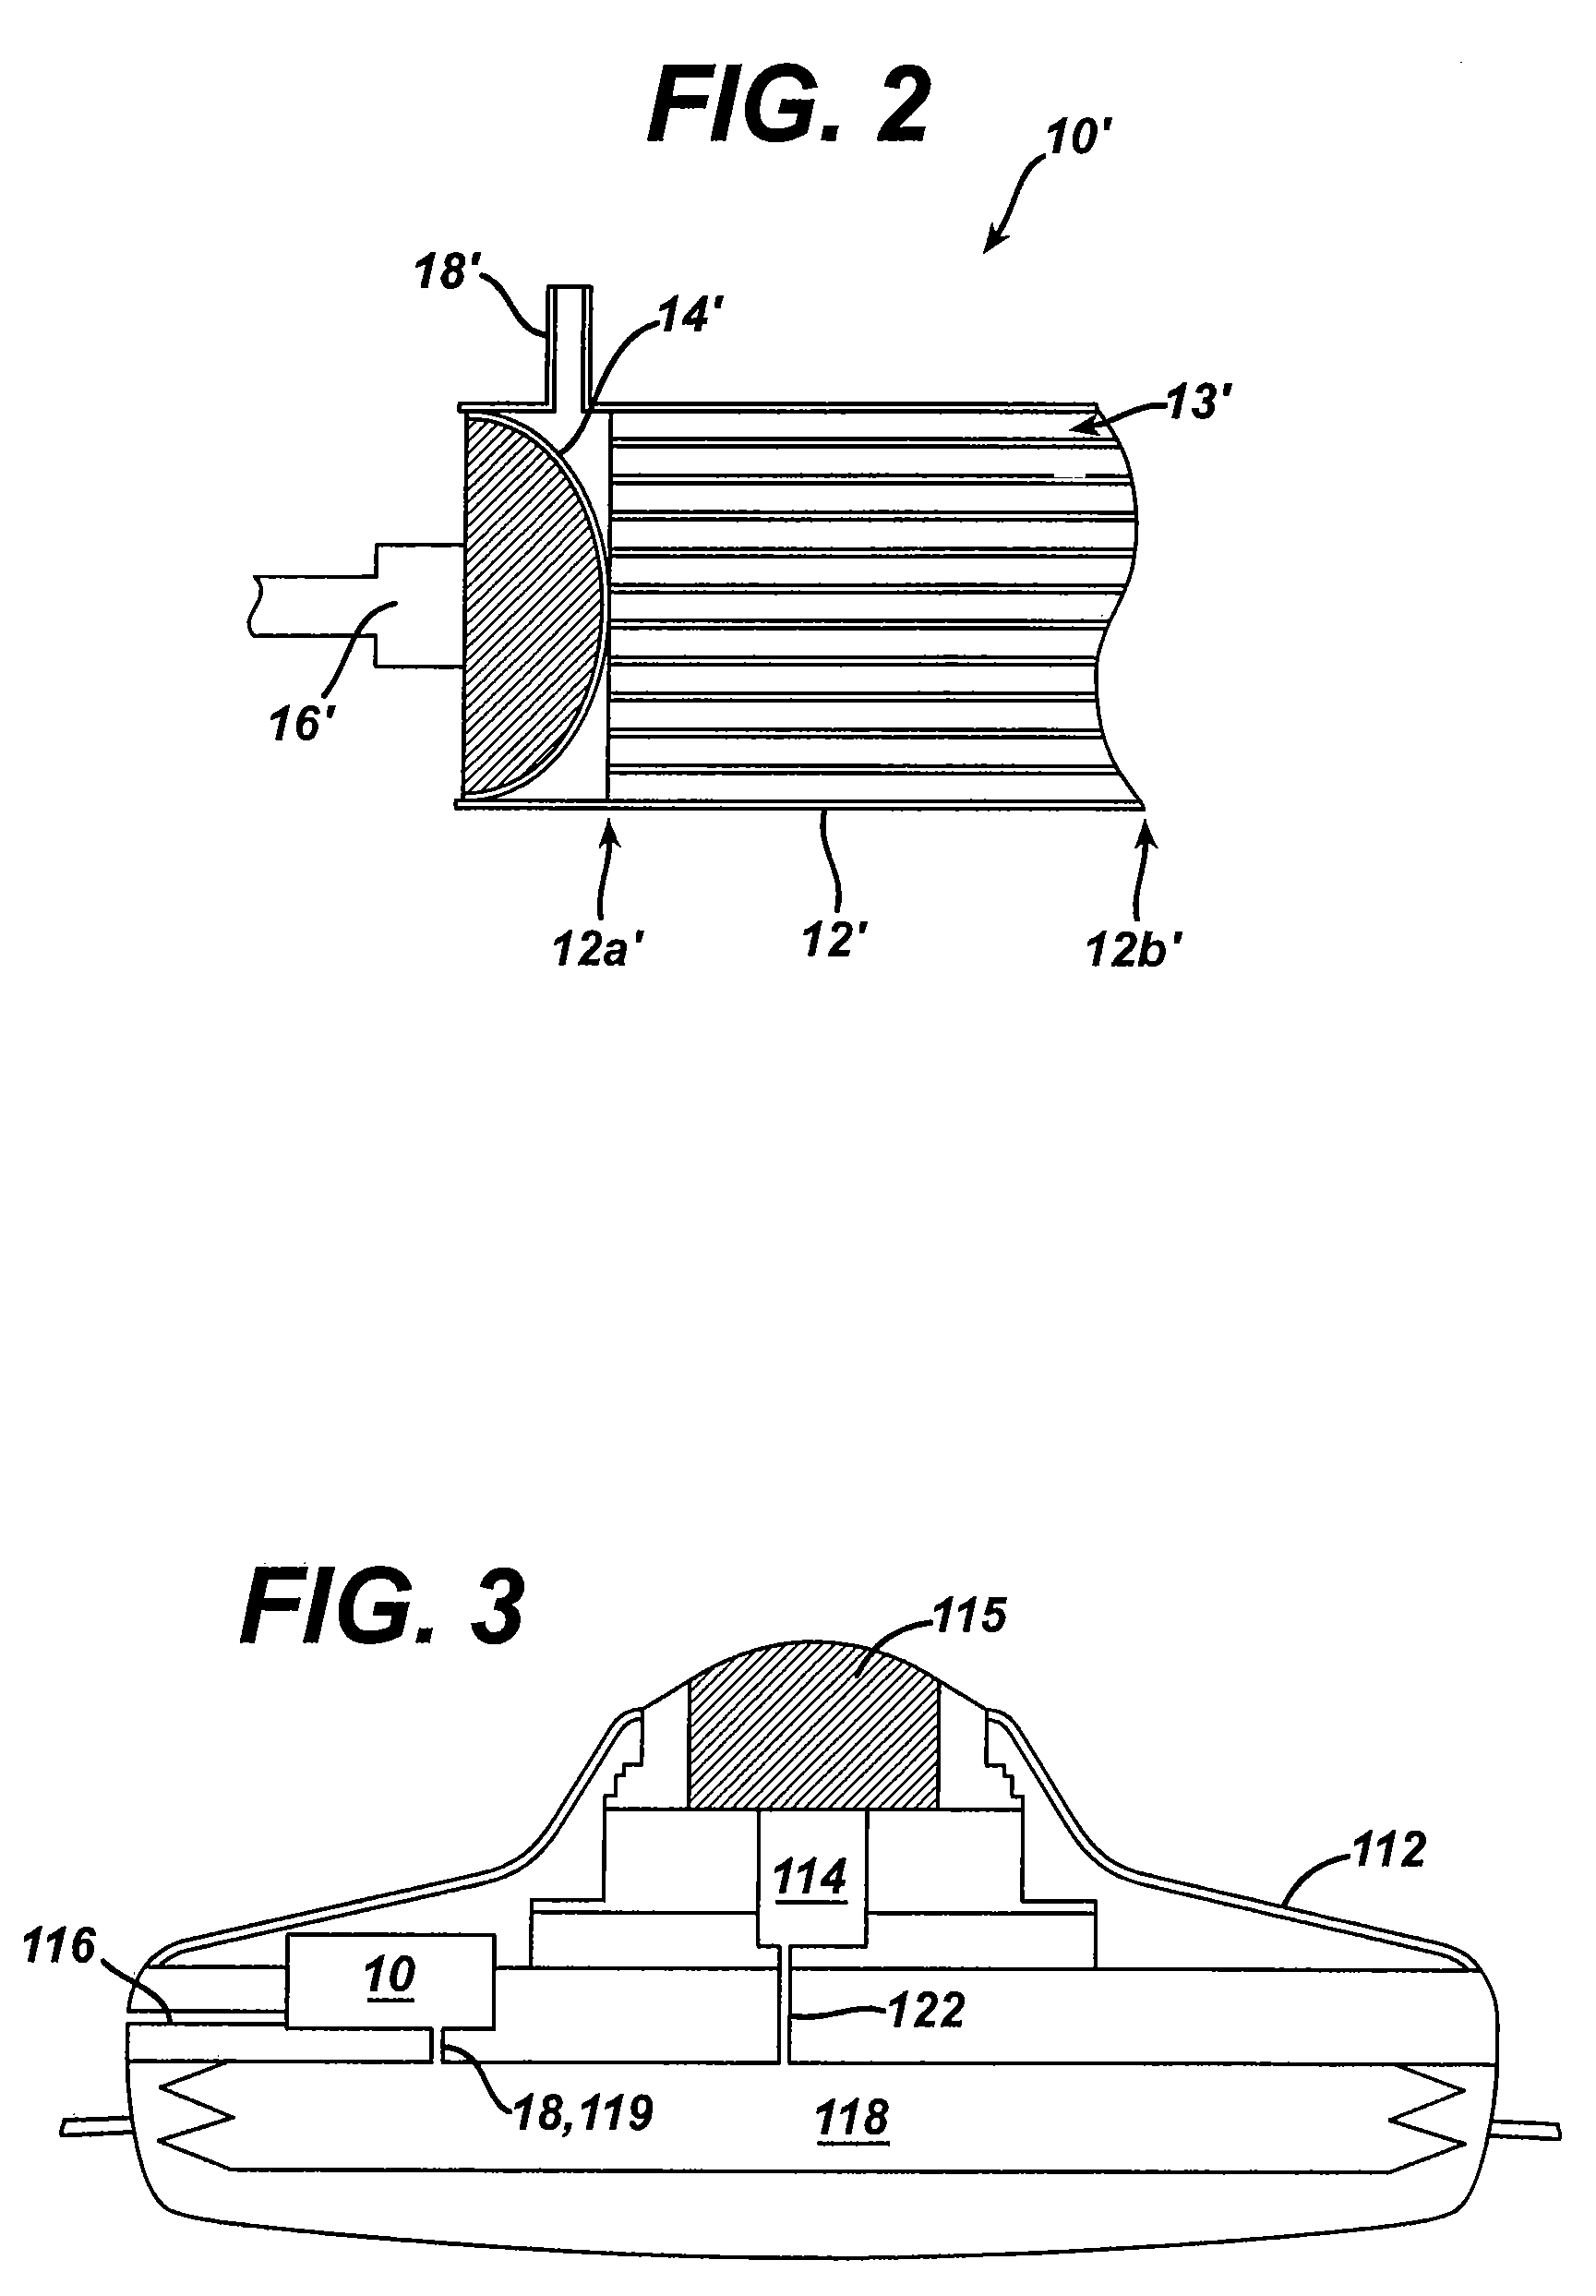 Implantable pump with adjustable flow rate